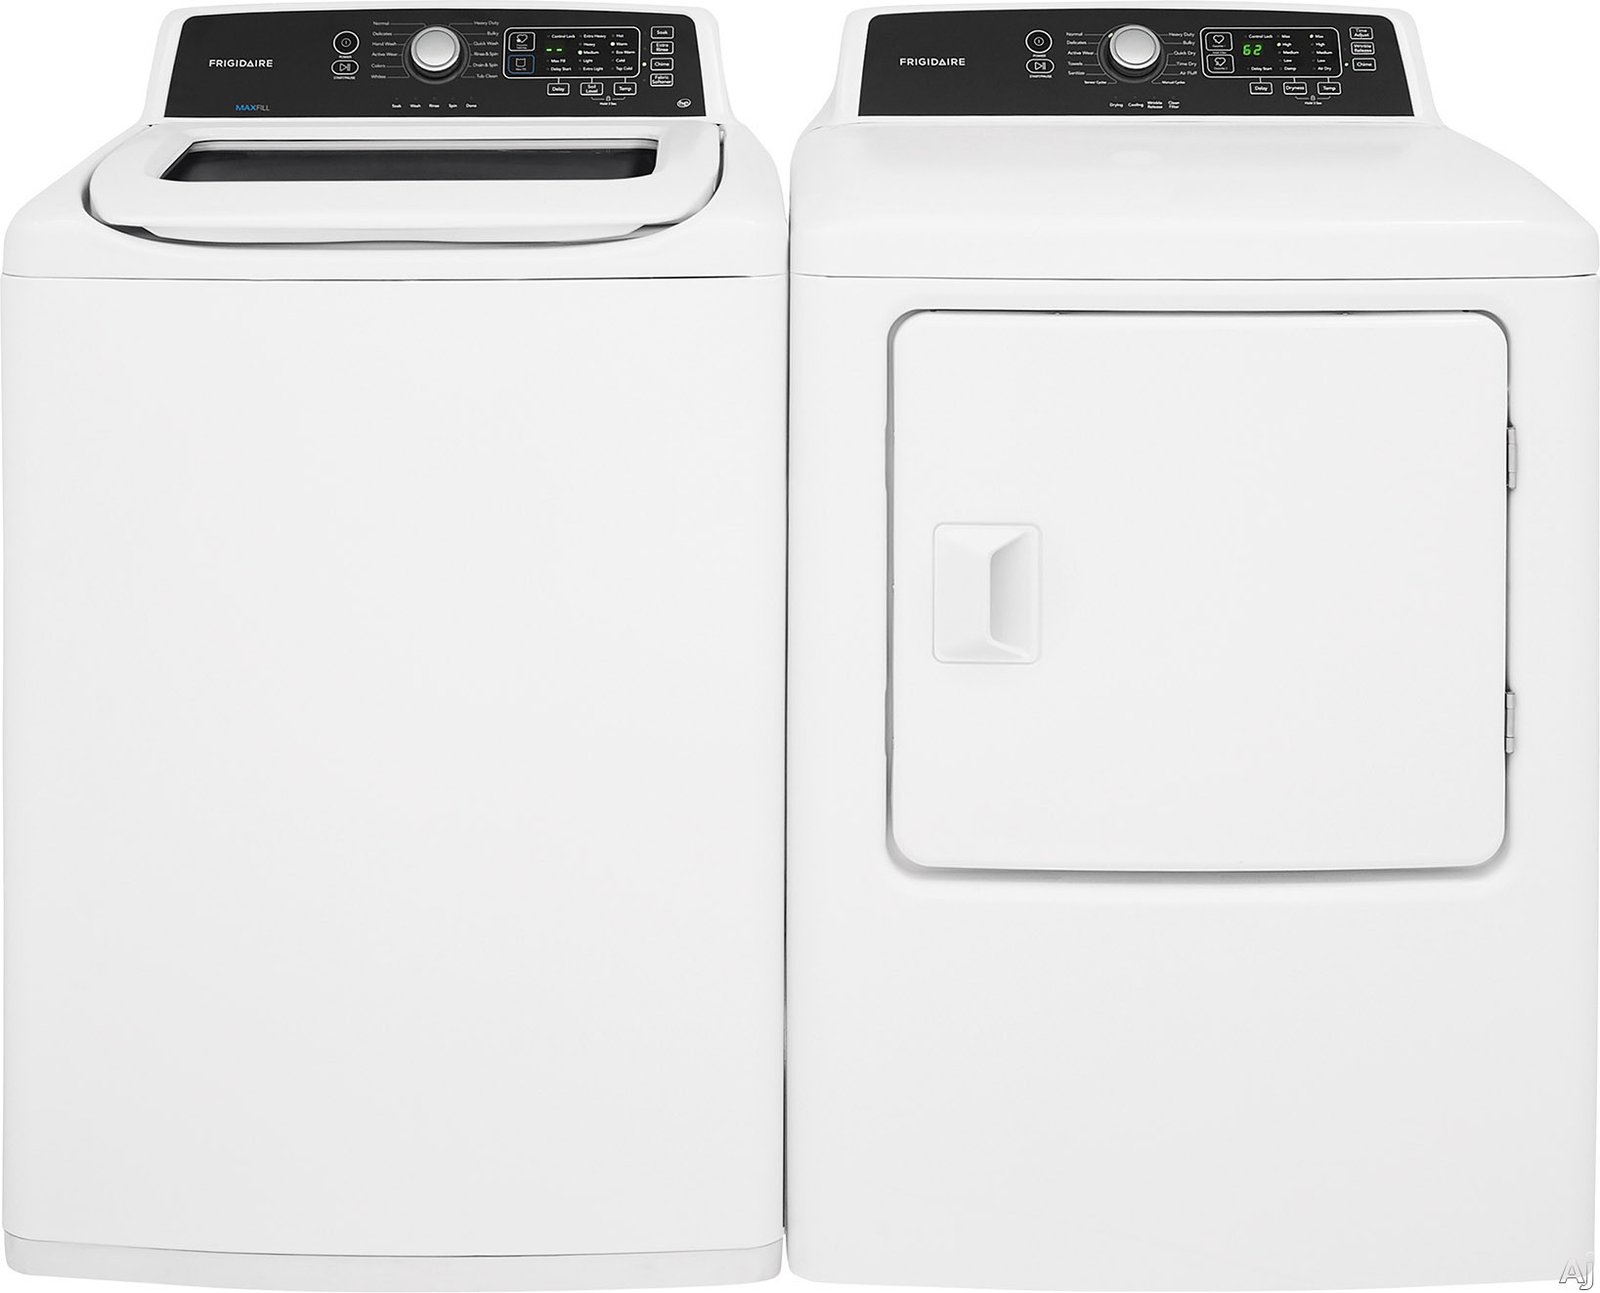 Frigidaire FRWADREW4 Side-by-Side Washer & Dryer Set with Top Load Washer and Electric Dryer in White